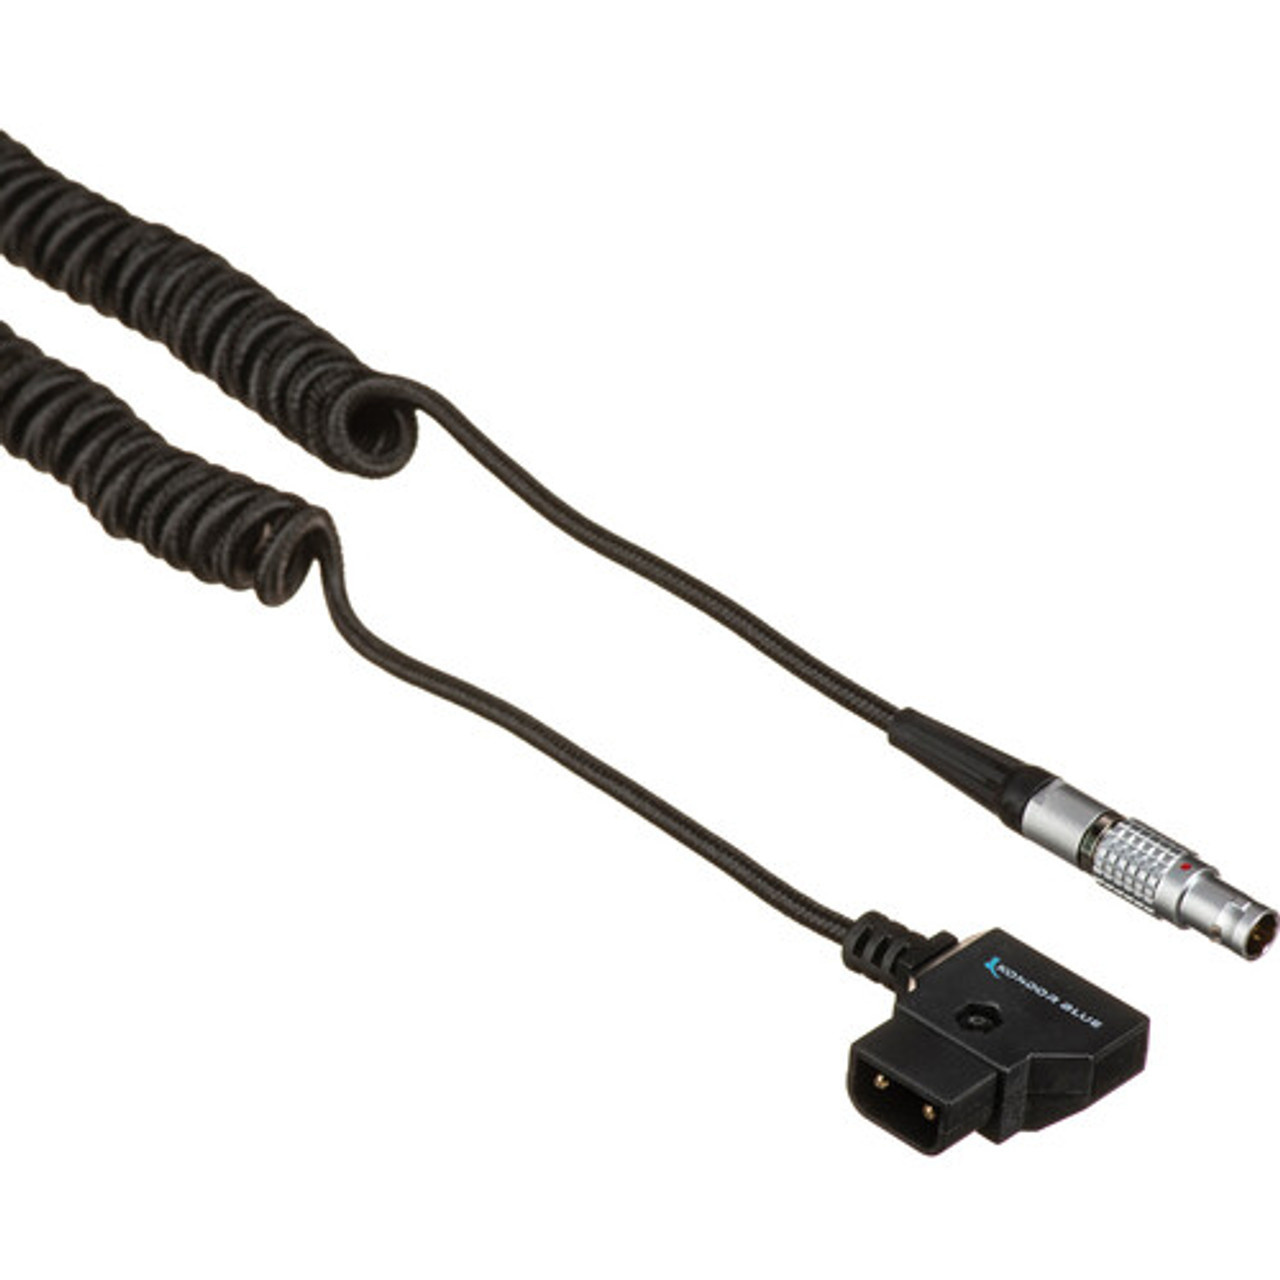 Kondor Blue Coiled D-TAP to LEMO 2 Pin 0B Male Power Cable for Z Cam, SmallHD, Teradek (Black)